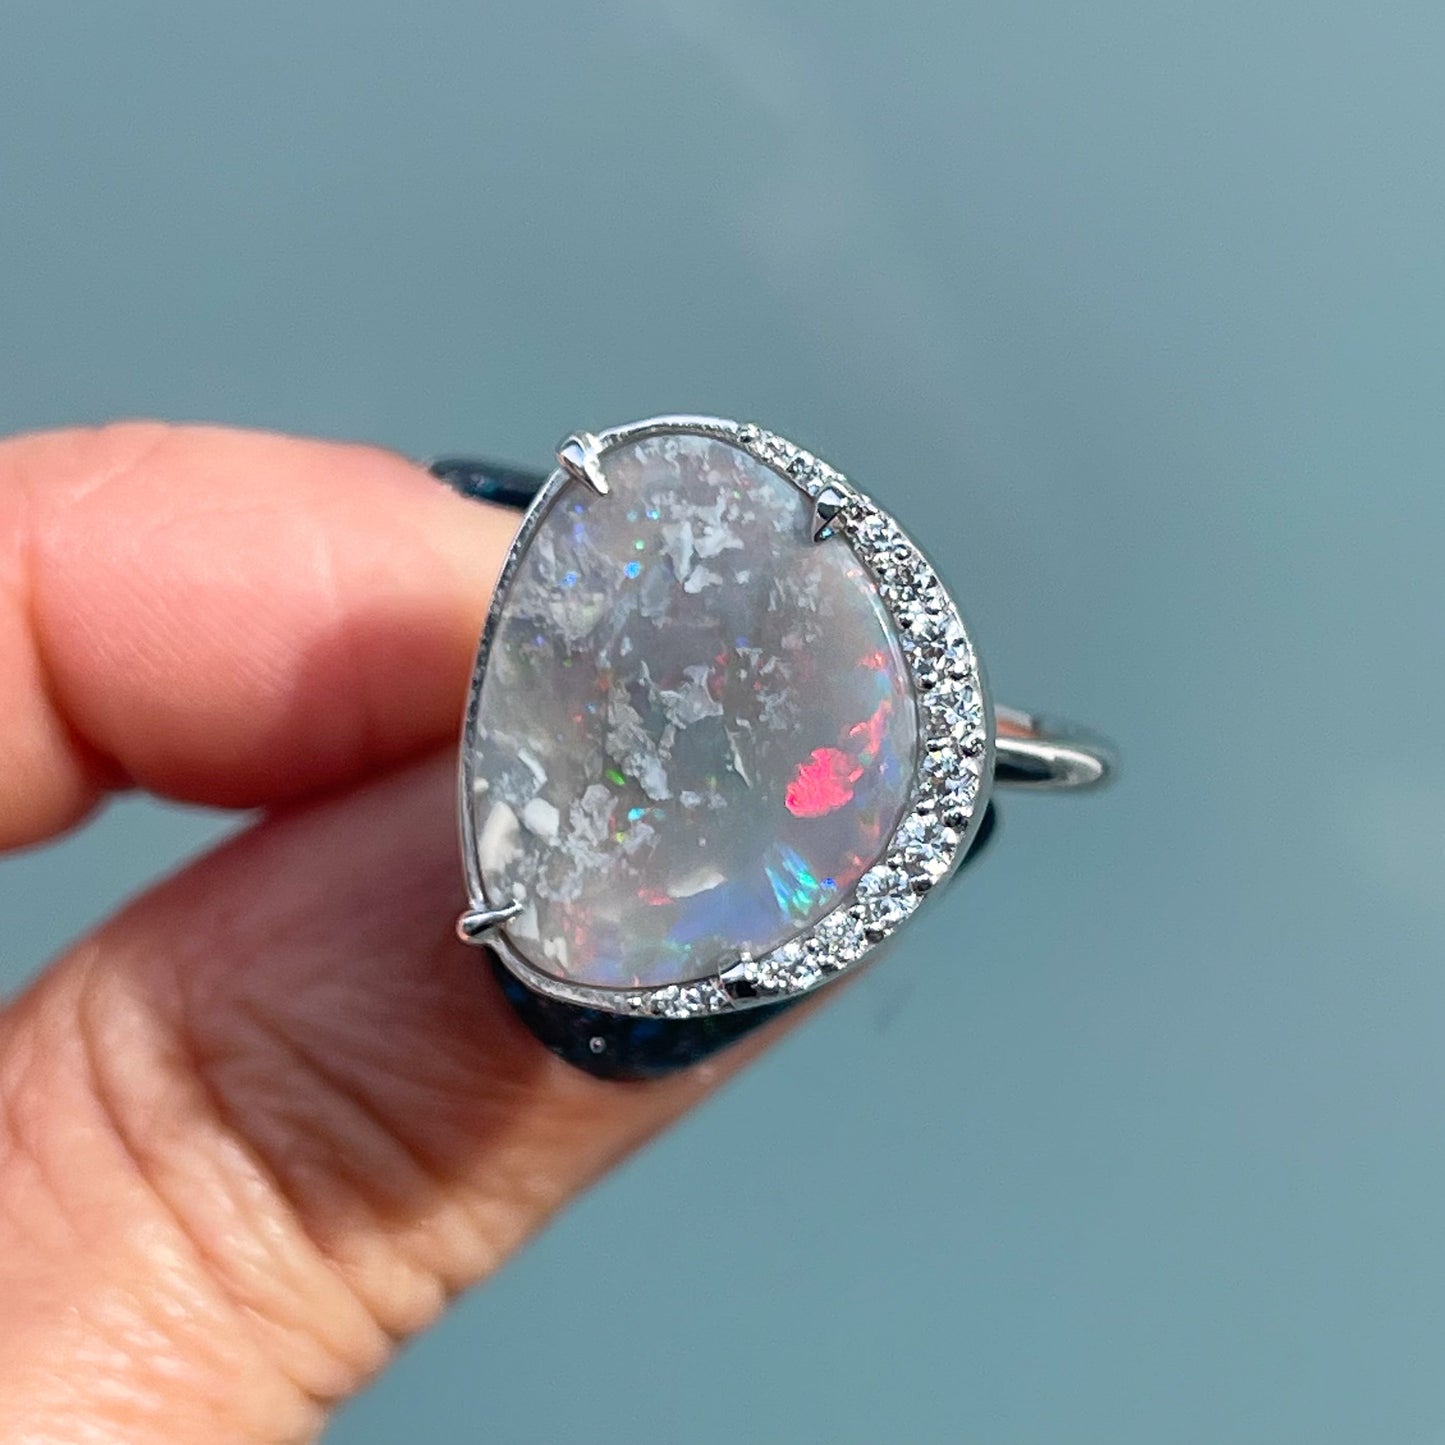 An Australian Opal Ring by NIXIN Jewelry. The Black Opal ring is set in 14k white gold with diamonds.